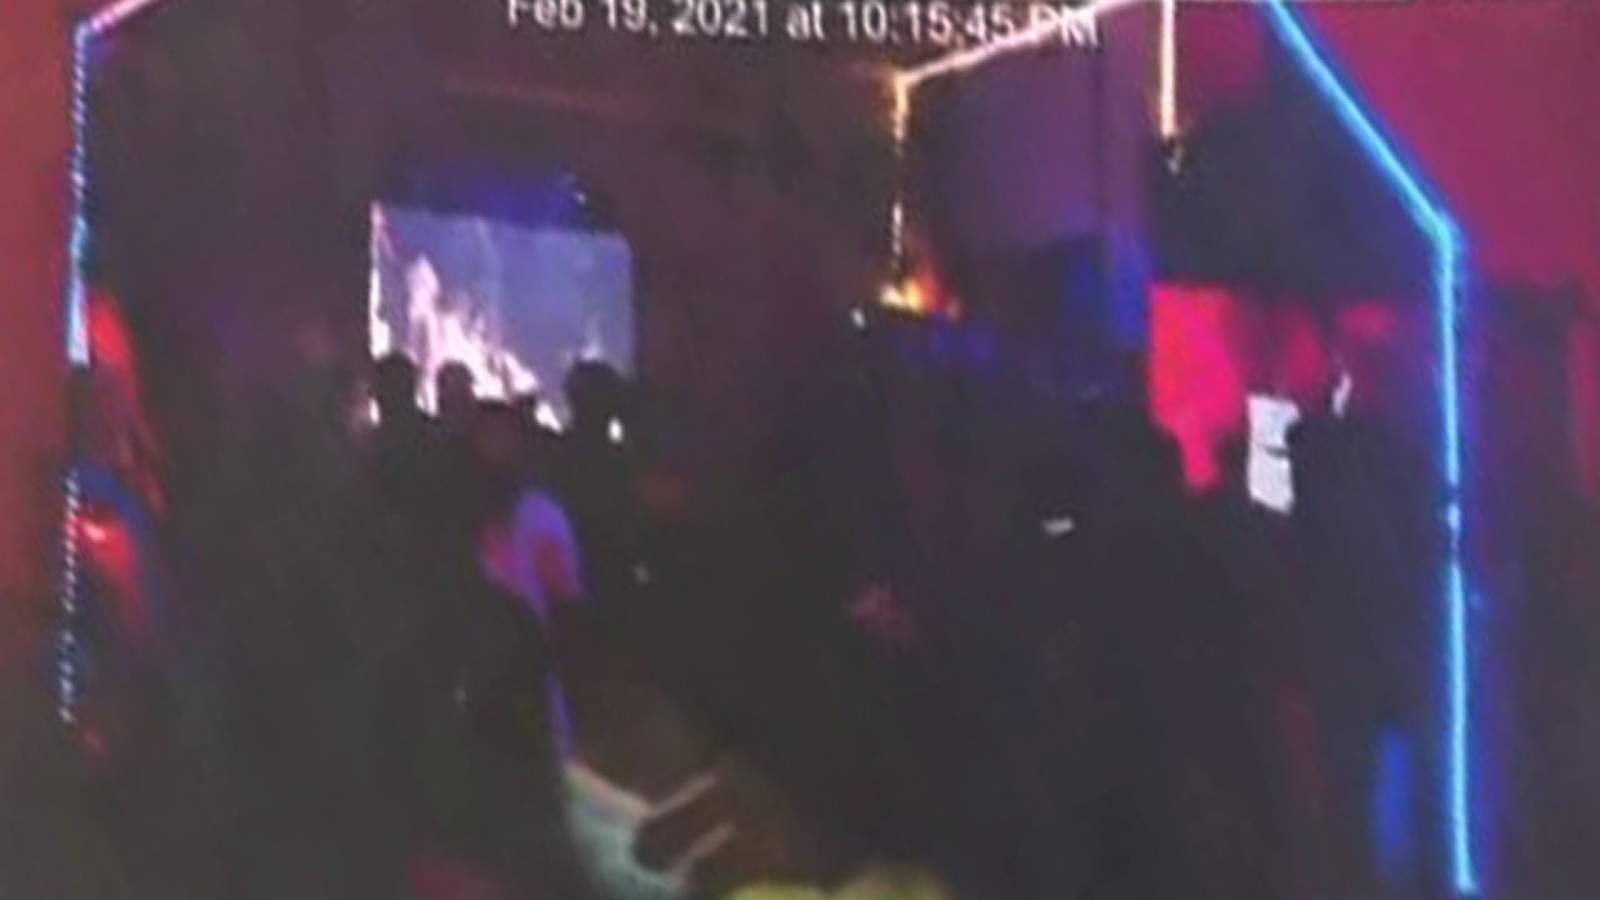 Miami commissioners to target pop-up nightclubs with hefty fines